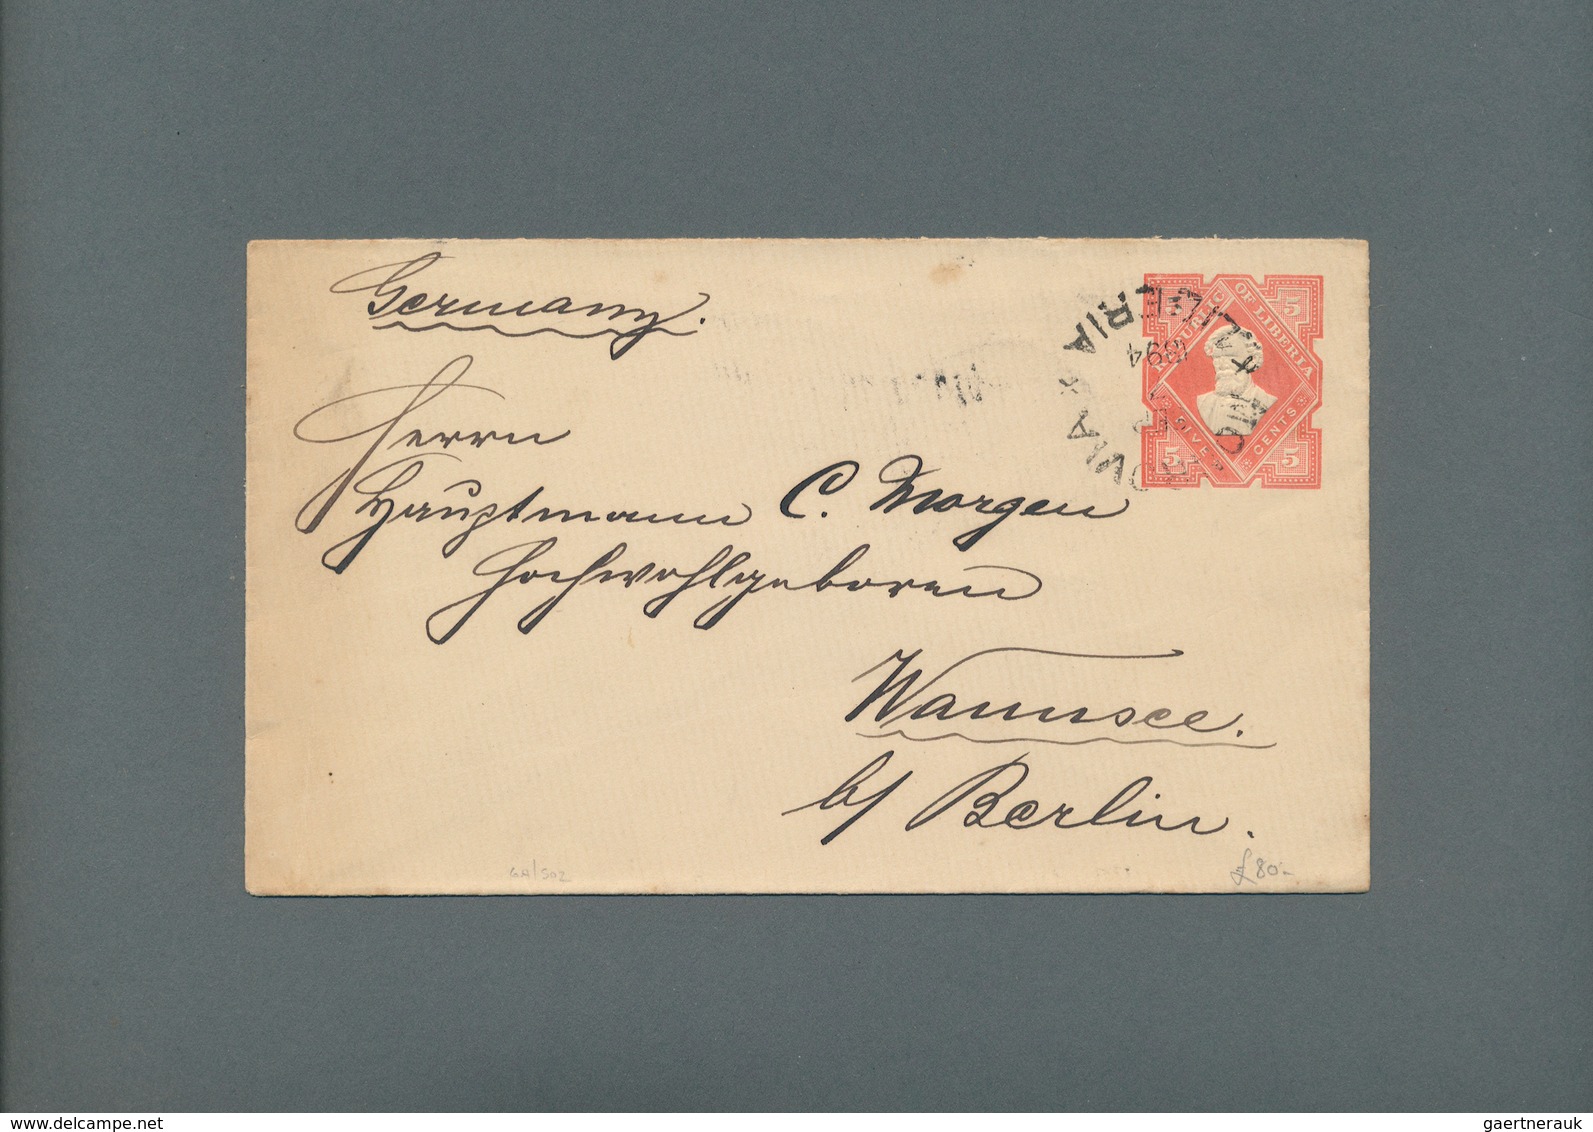 Liberia: 1894/1897, lot of 9 stationery envelopes and wrappers (8 used, 1 specimen), good condition.